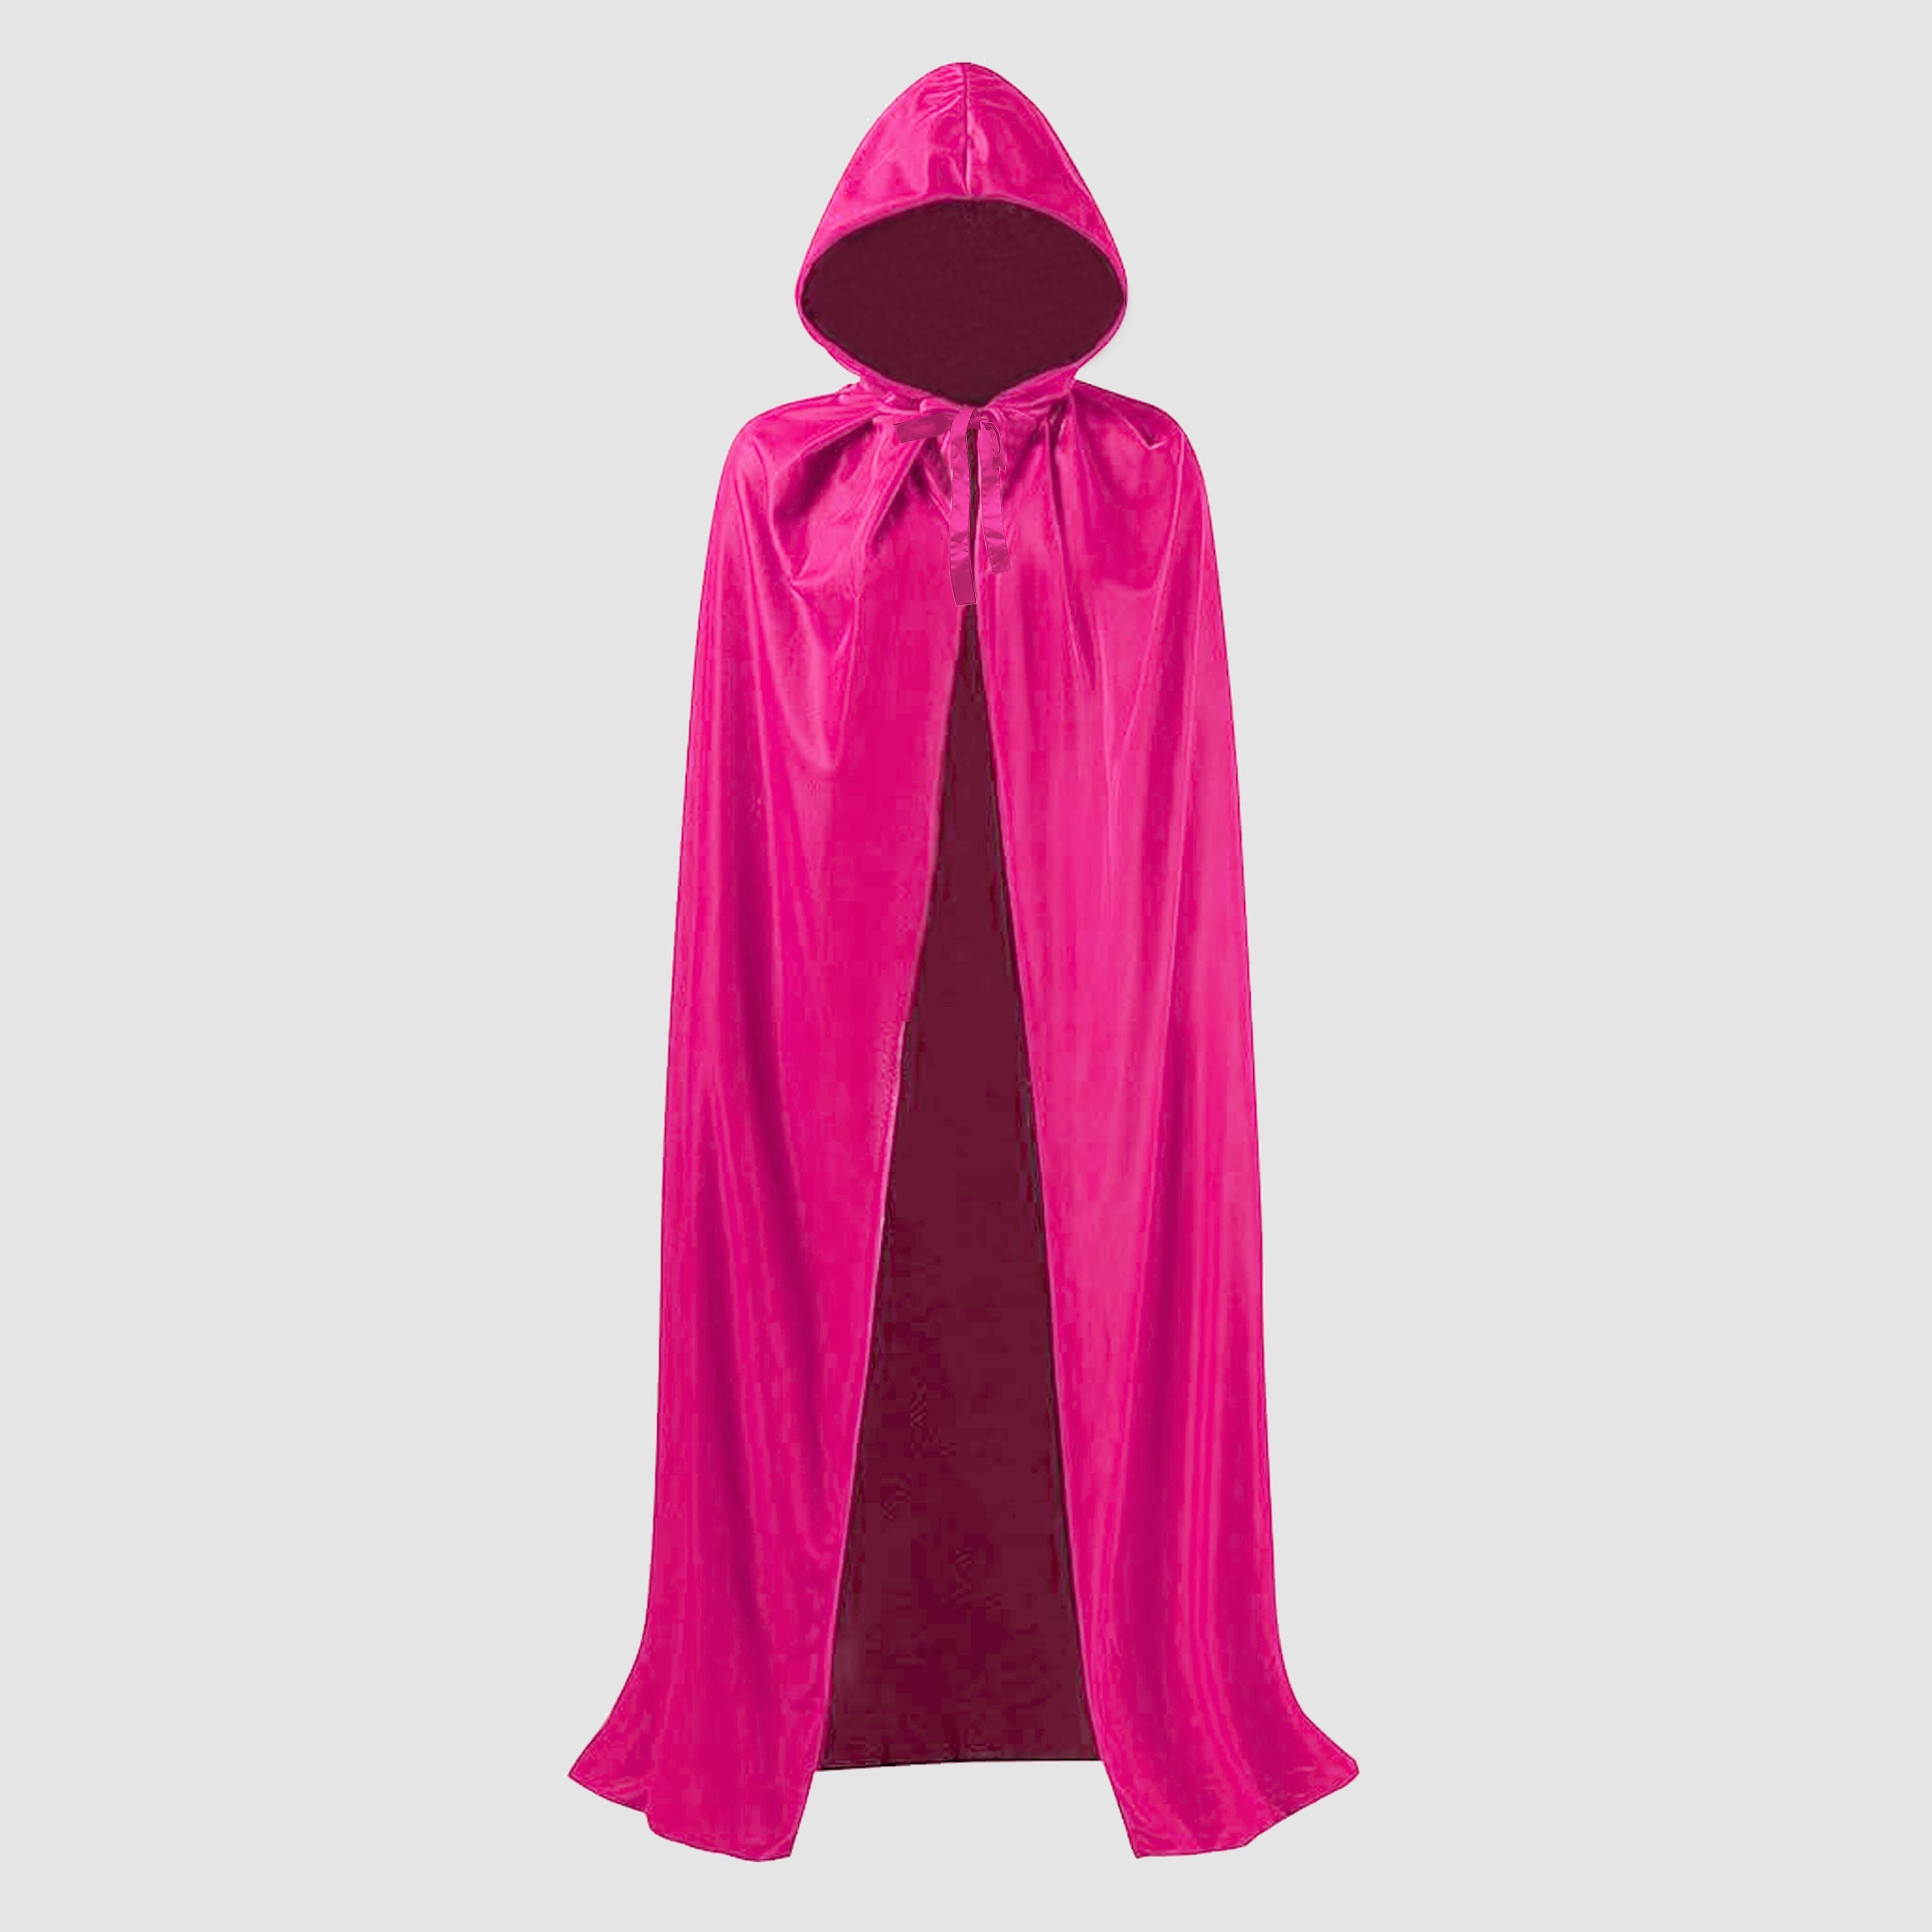 Nibano Hooded Show Gown Hot Pink